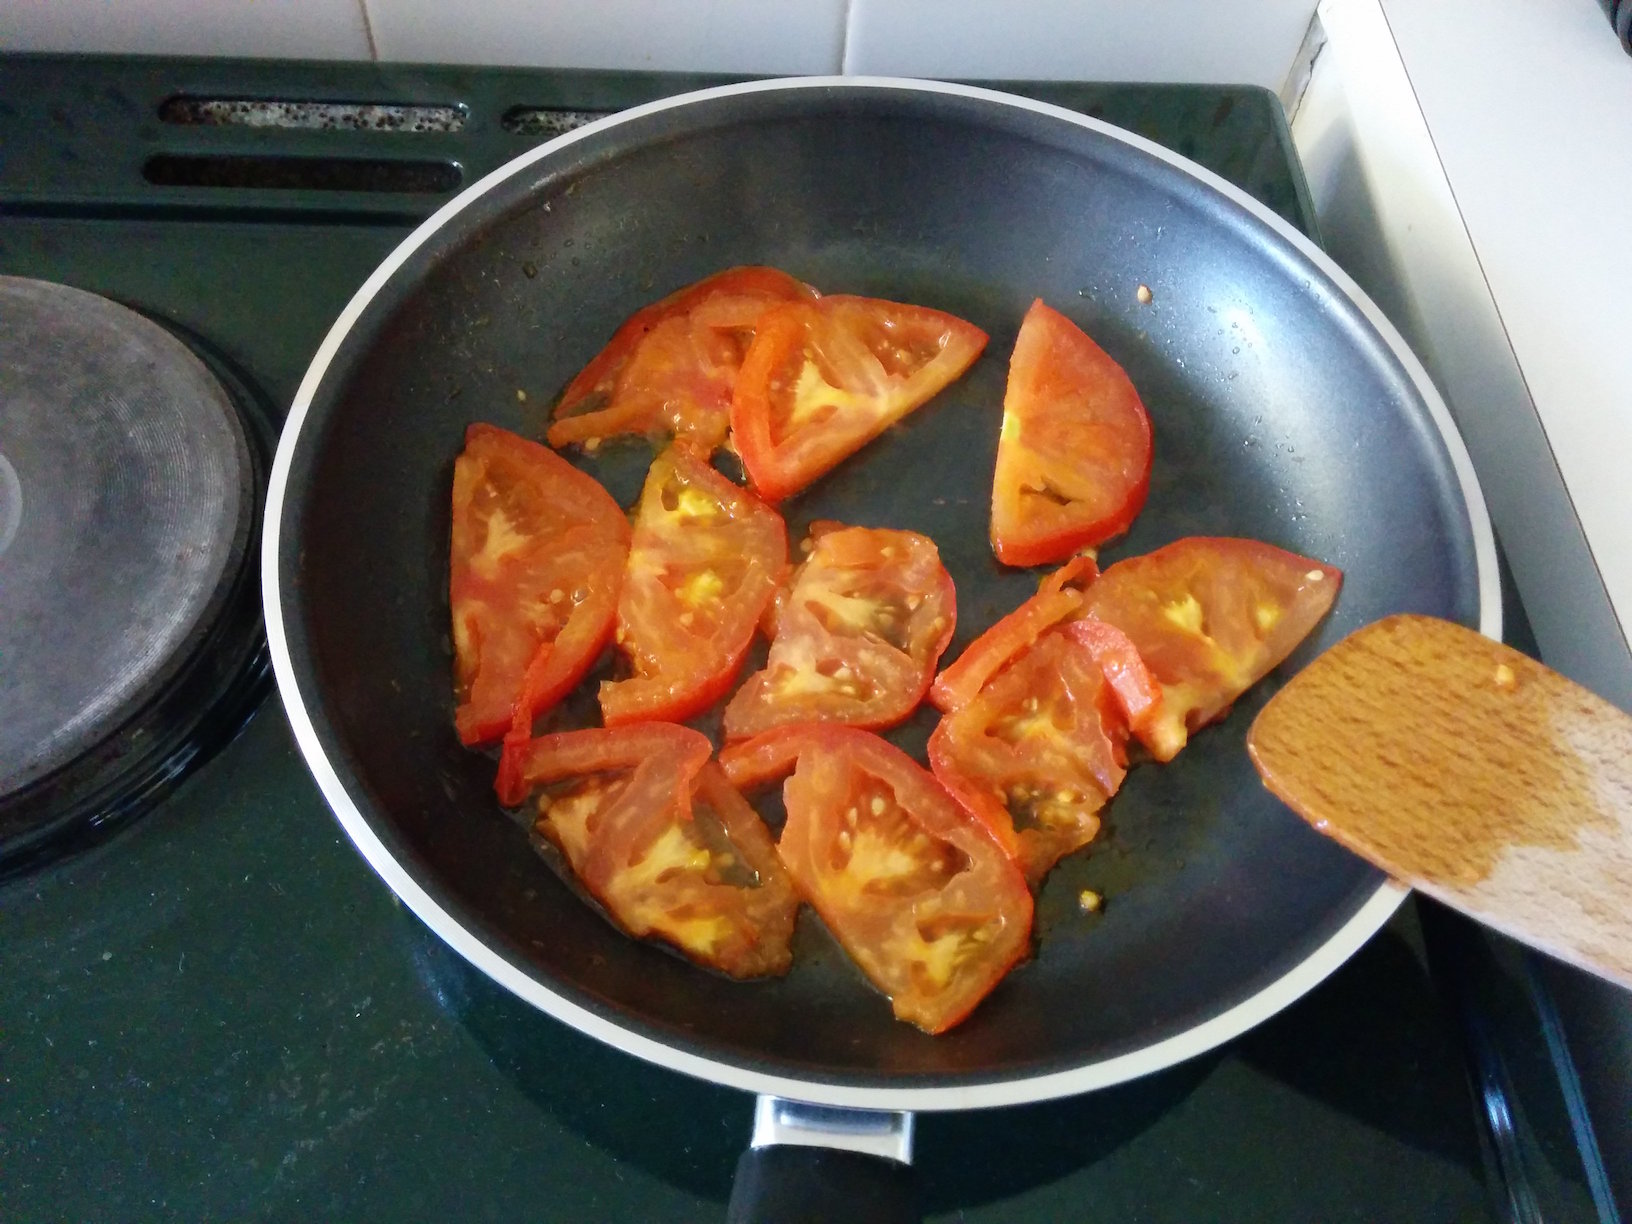 Tomatoes after frying in oil